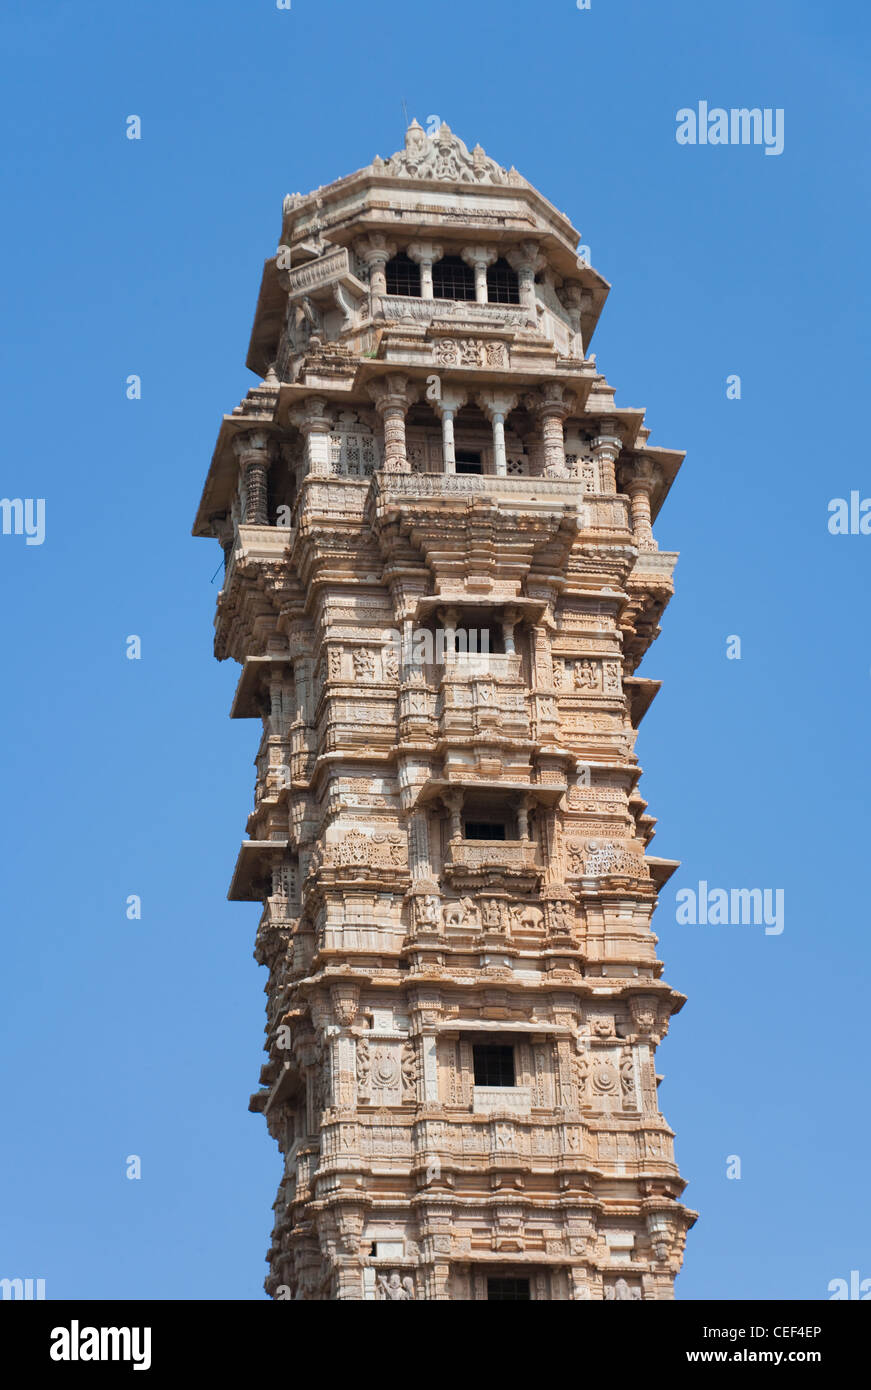 Victoria Tower in Chittorgarh Fort, Rajasthan, India Stock Photo